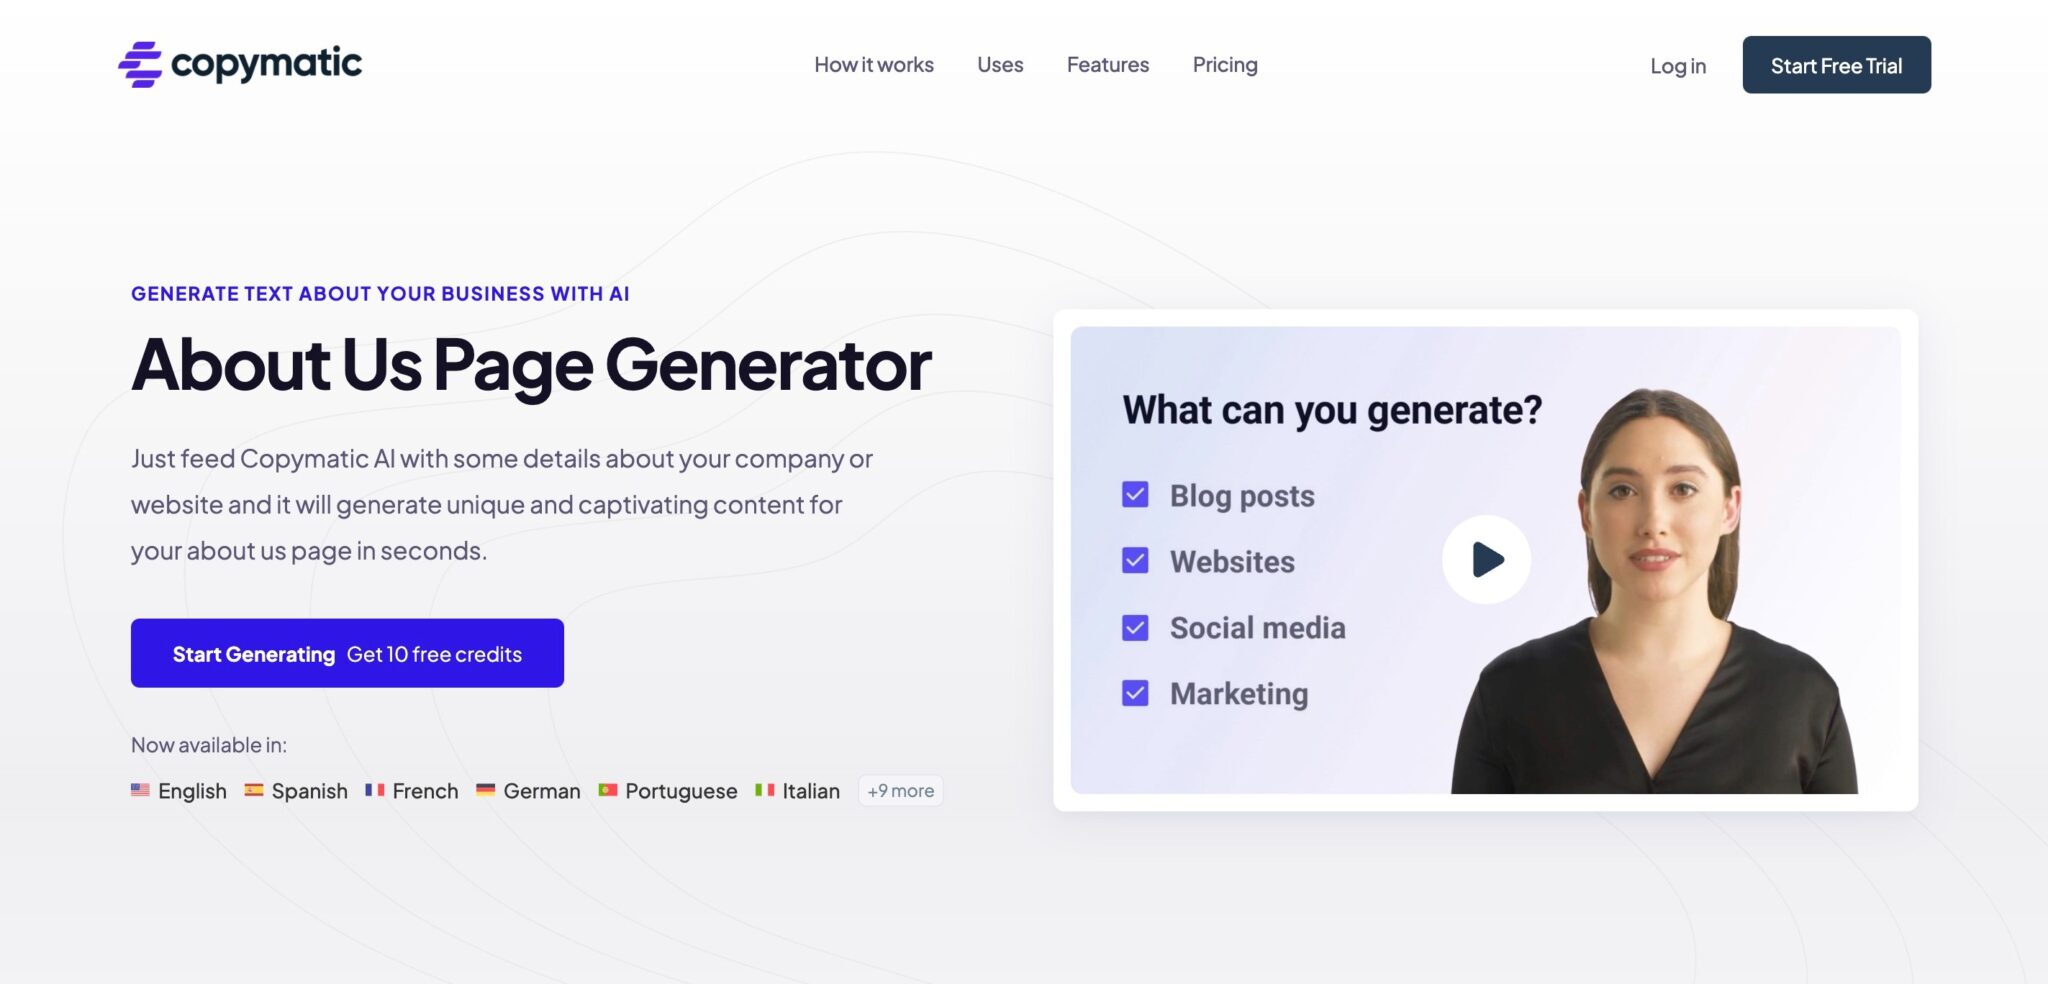 Copymatic About Us Page Generator